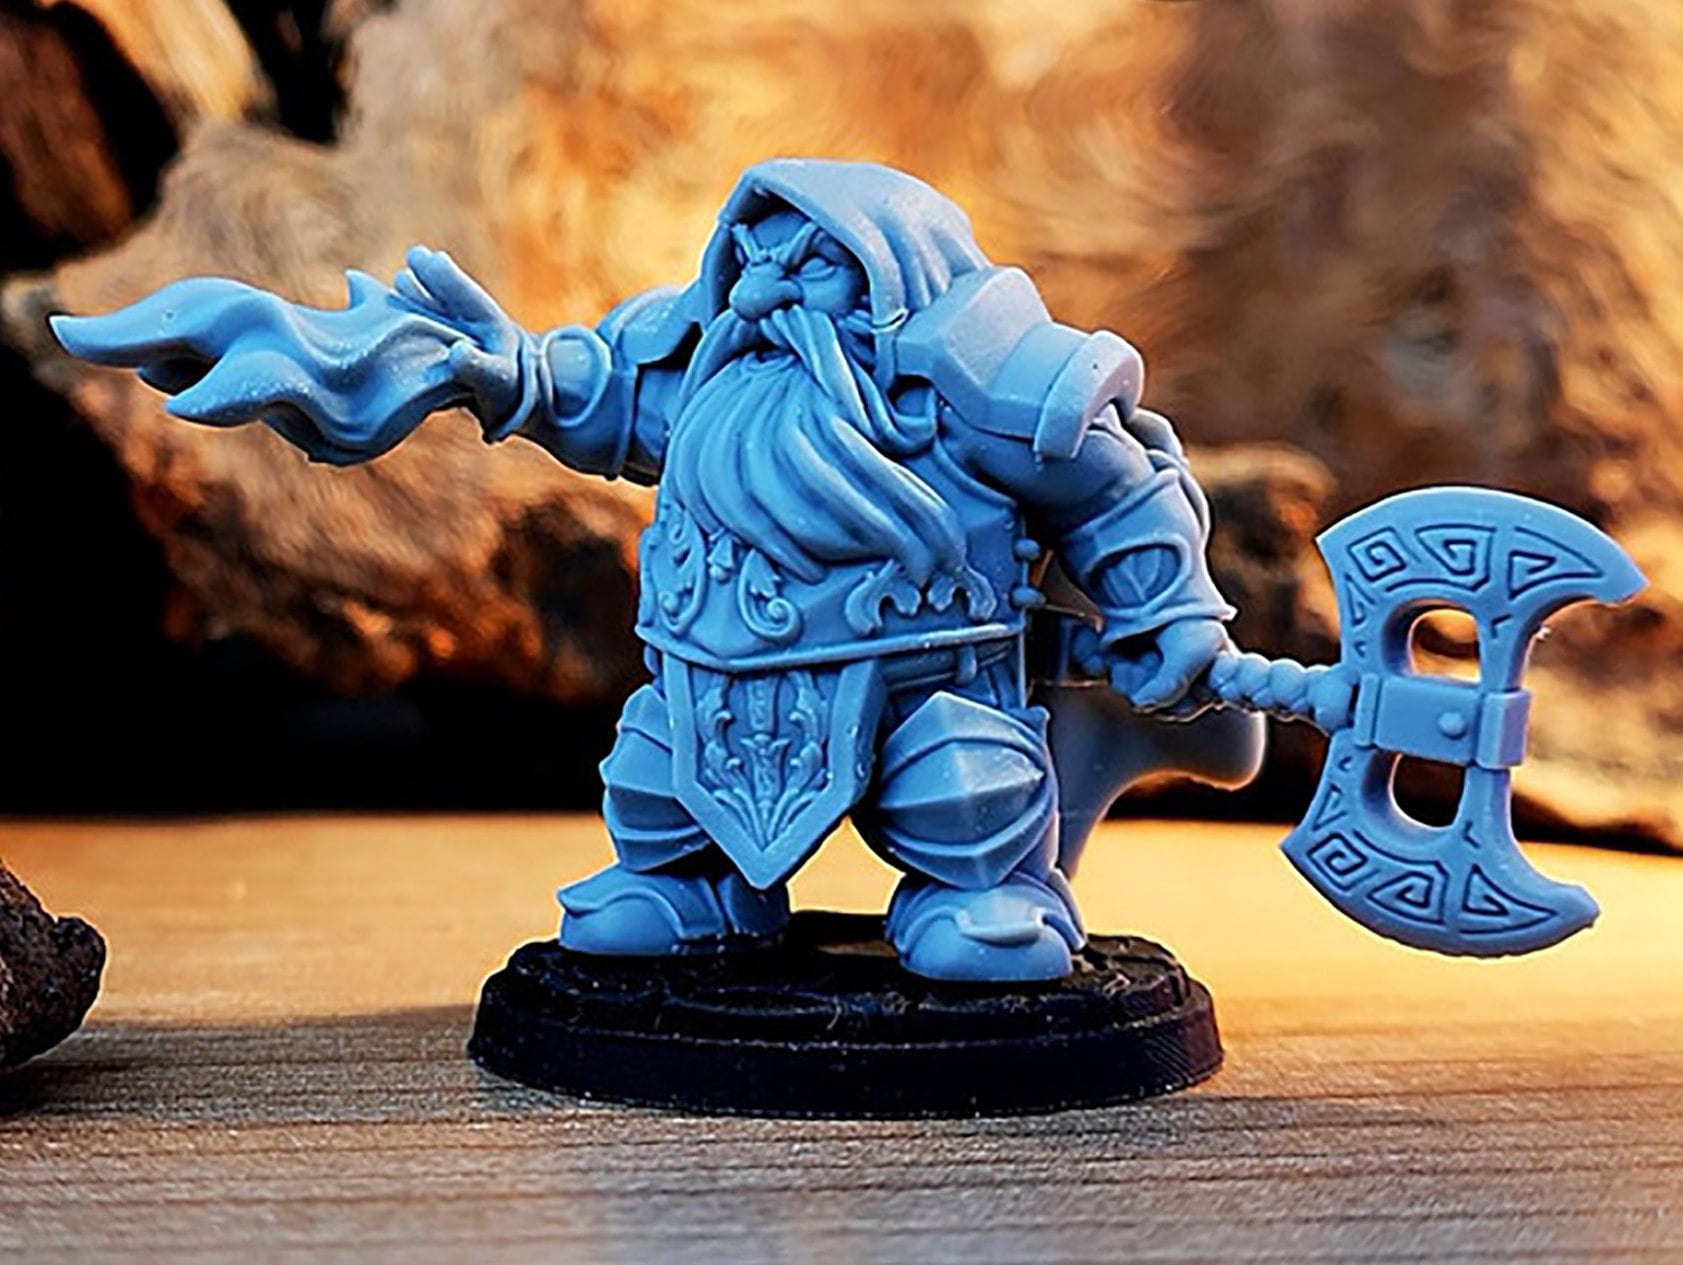 DWARF Eldritch Knight (M) "Dorfas" | Dungeons and Dragons | DnD | Pathfinder | Tabletop | RPG | Hero Size | 28 mm-Role Playing Miniatures